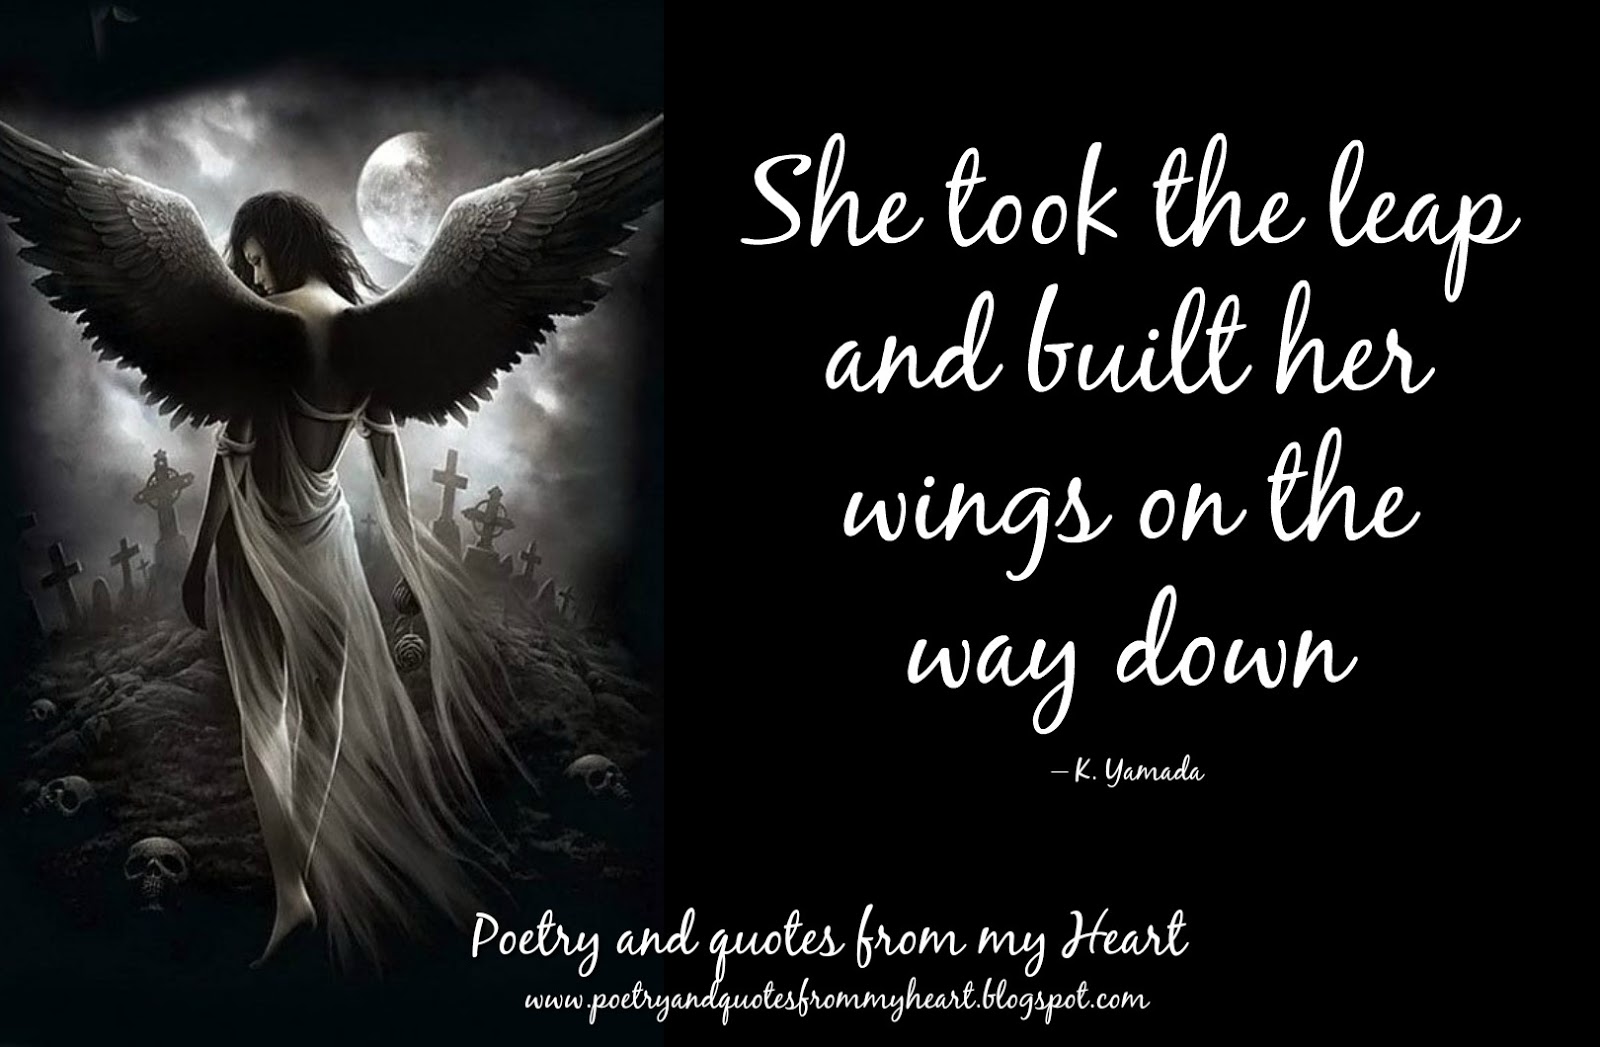 Poetry and quotes from my Heart: She took the leap and built her wings ...